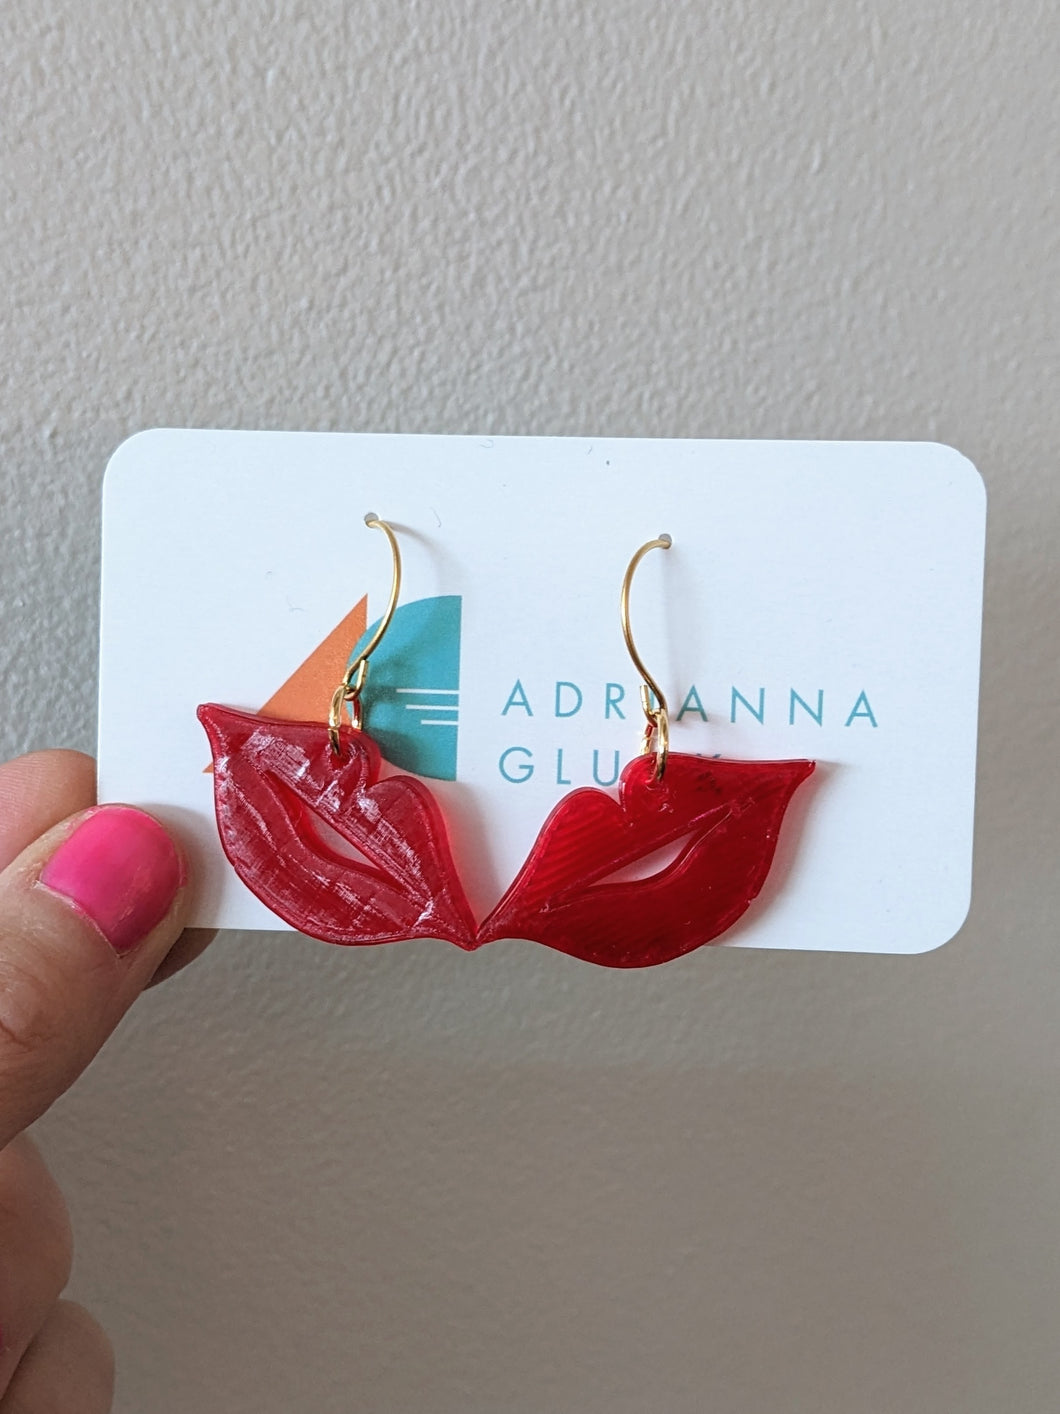 NEW 3D-printed ~ Lucious Lips Dangles ~ SINGLE ~ Small Batch Earrings